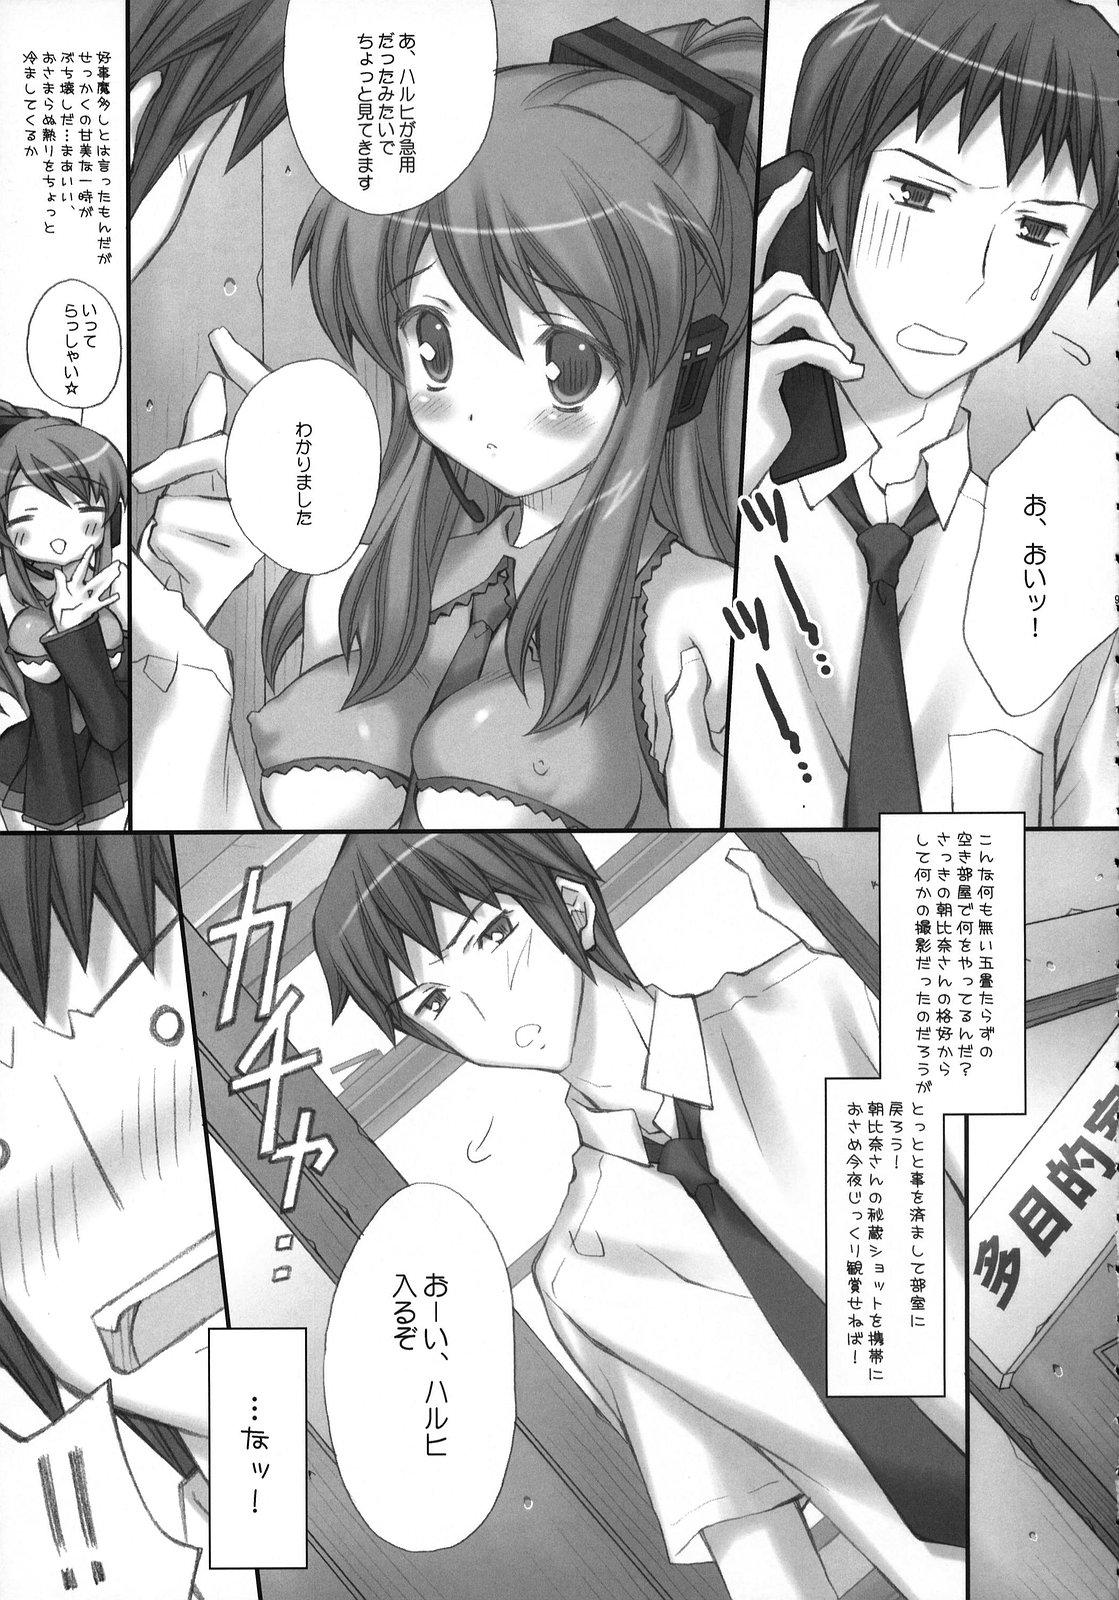 Cock Suck ponytail syndrome - The melancholy of haruhi suzumiya Boy Fuck Girl - Page 8